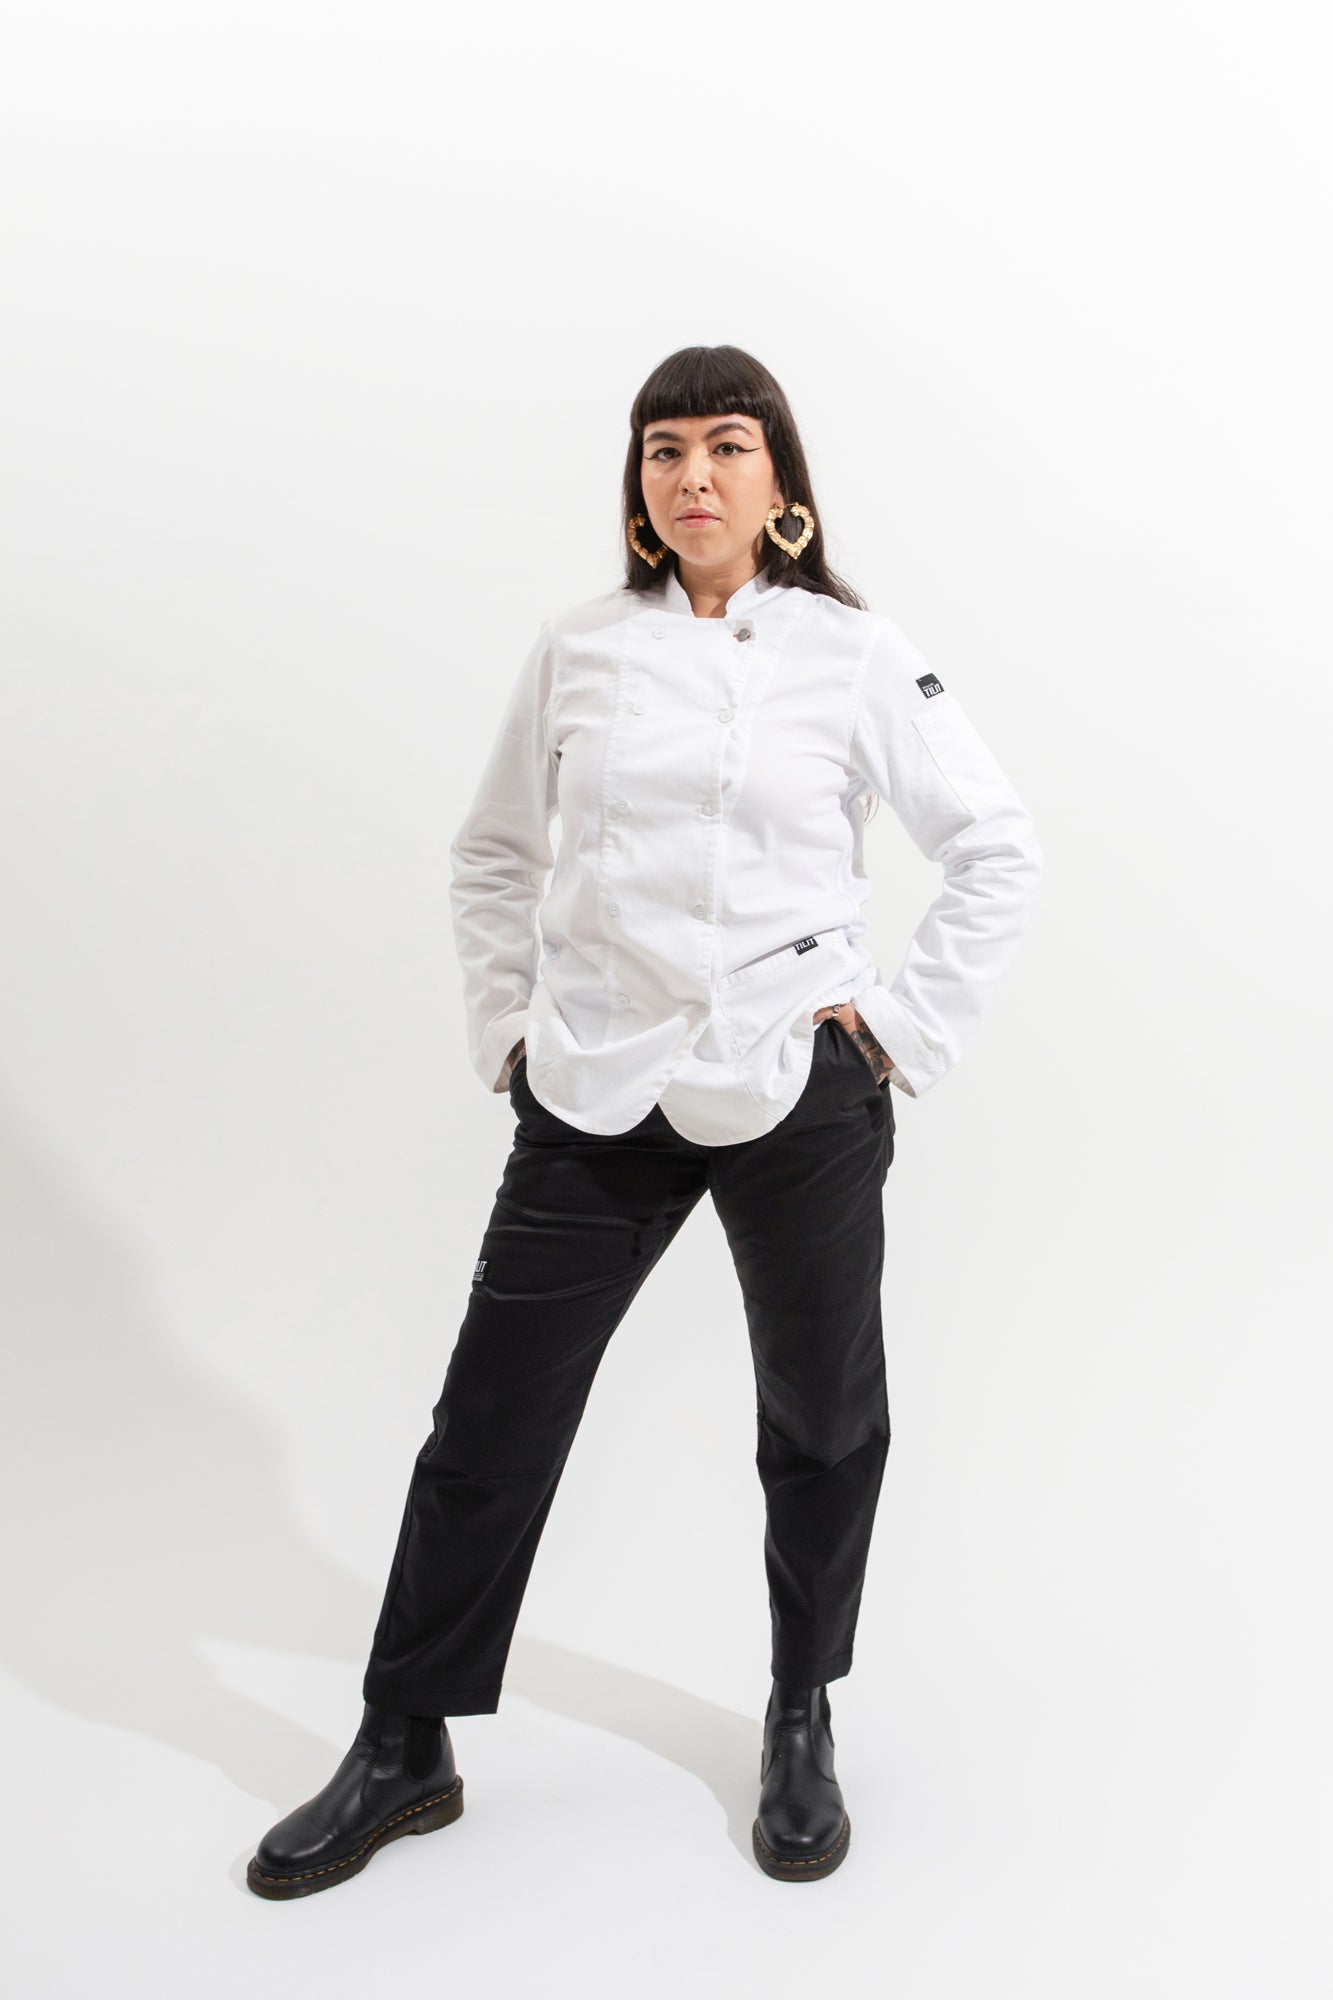 Black Chefs' Casual Wear, Stylish & Functional Chef Clothing